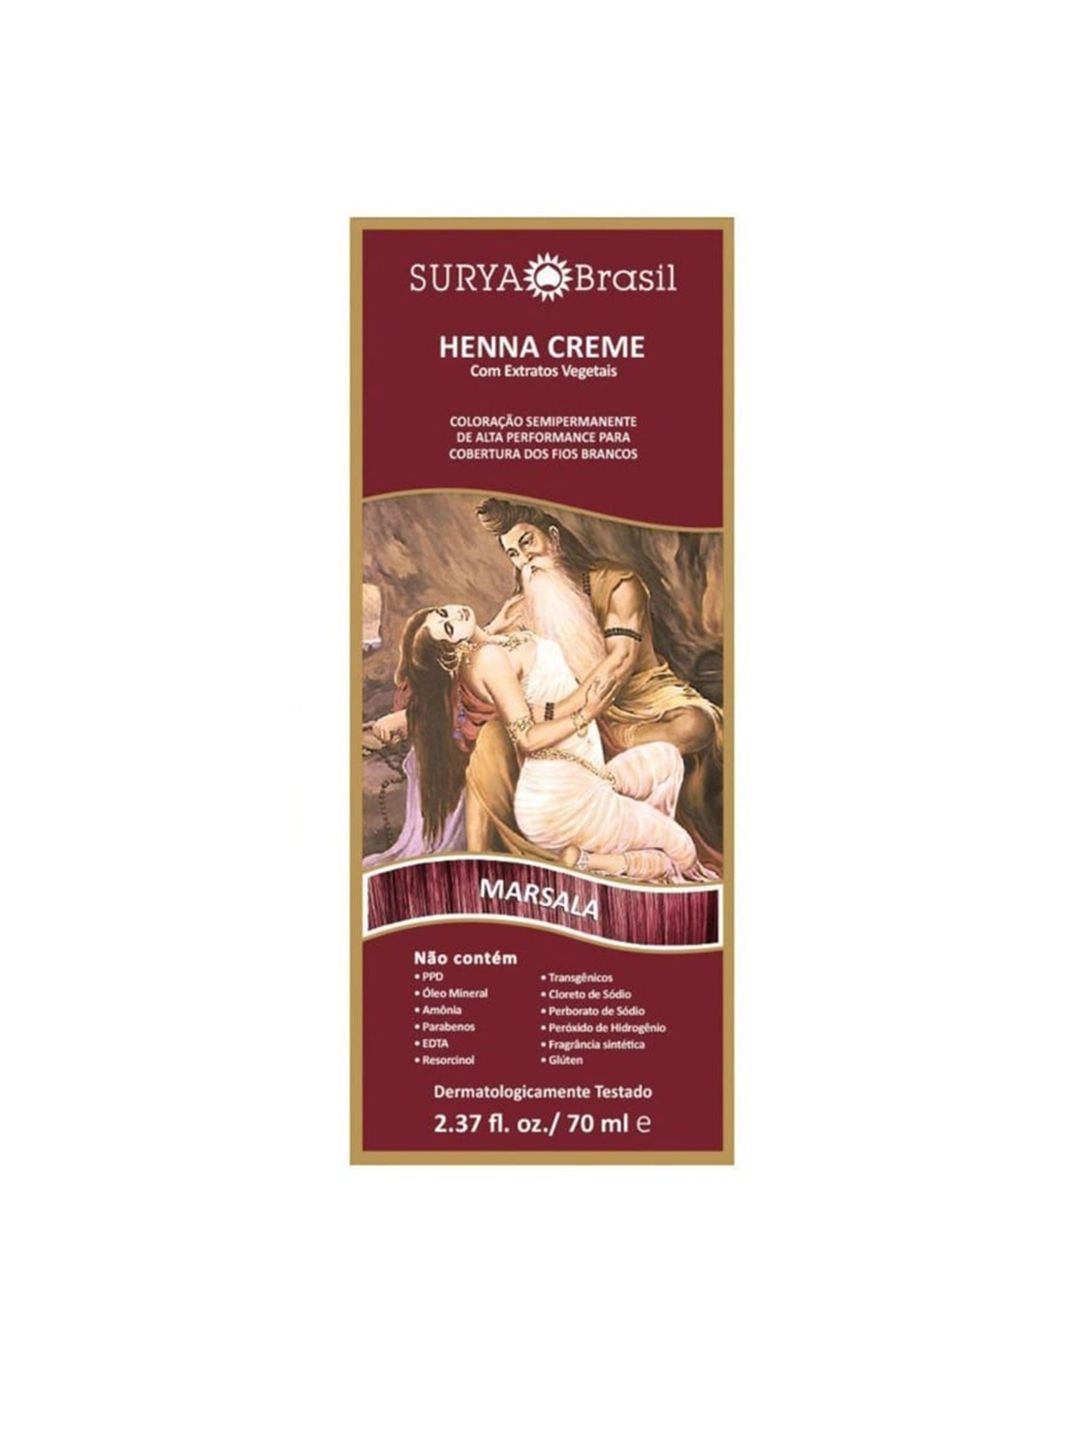 SURYA Brasil Henna Cream Semi-Permanent Hair Color with Plant Extracts 70ml - Marsala Price in India